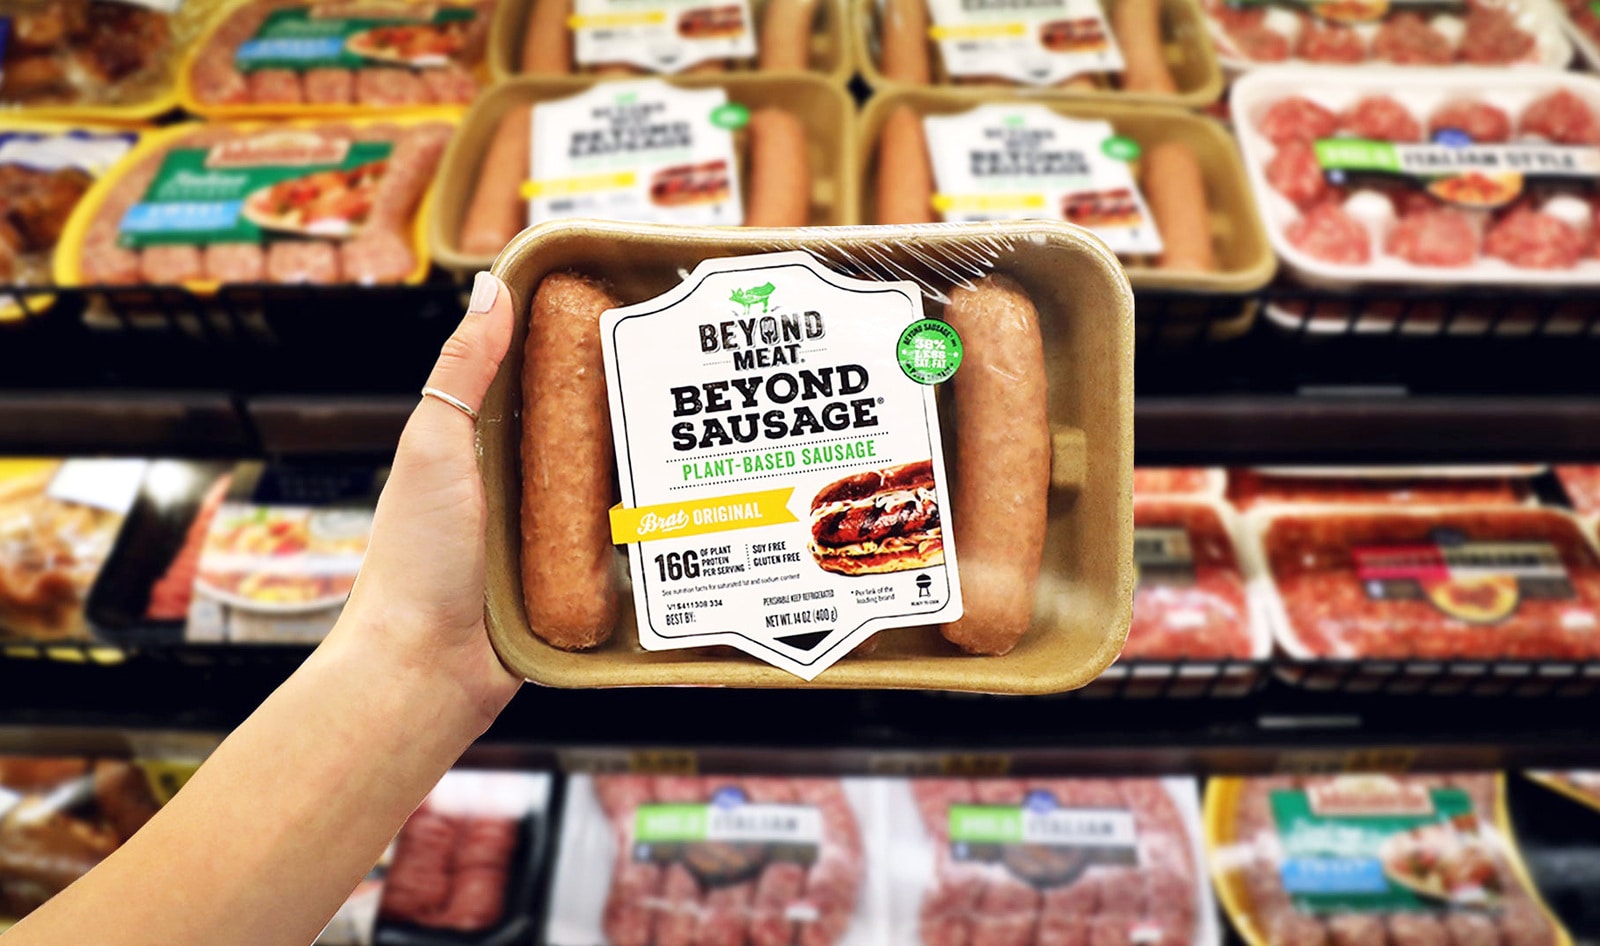 Plant-Based Sausage Market to Surge to $1 Billion by 2021